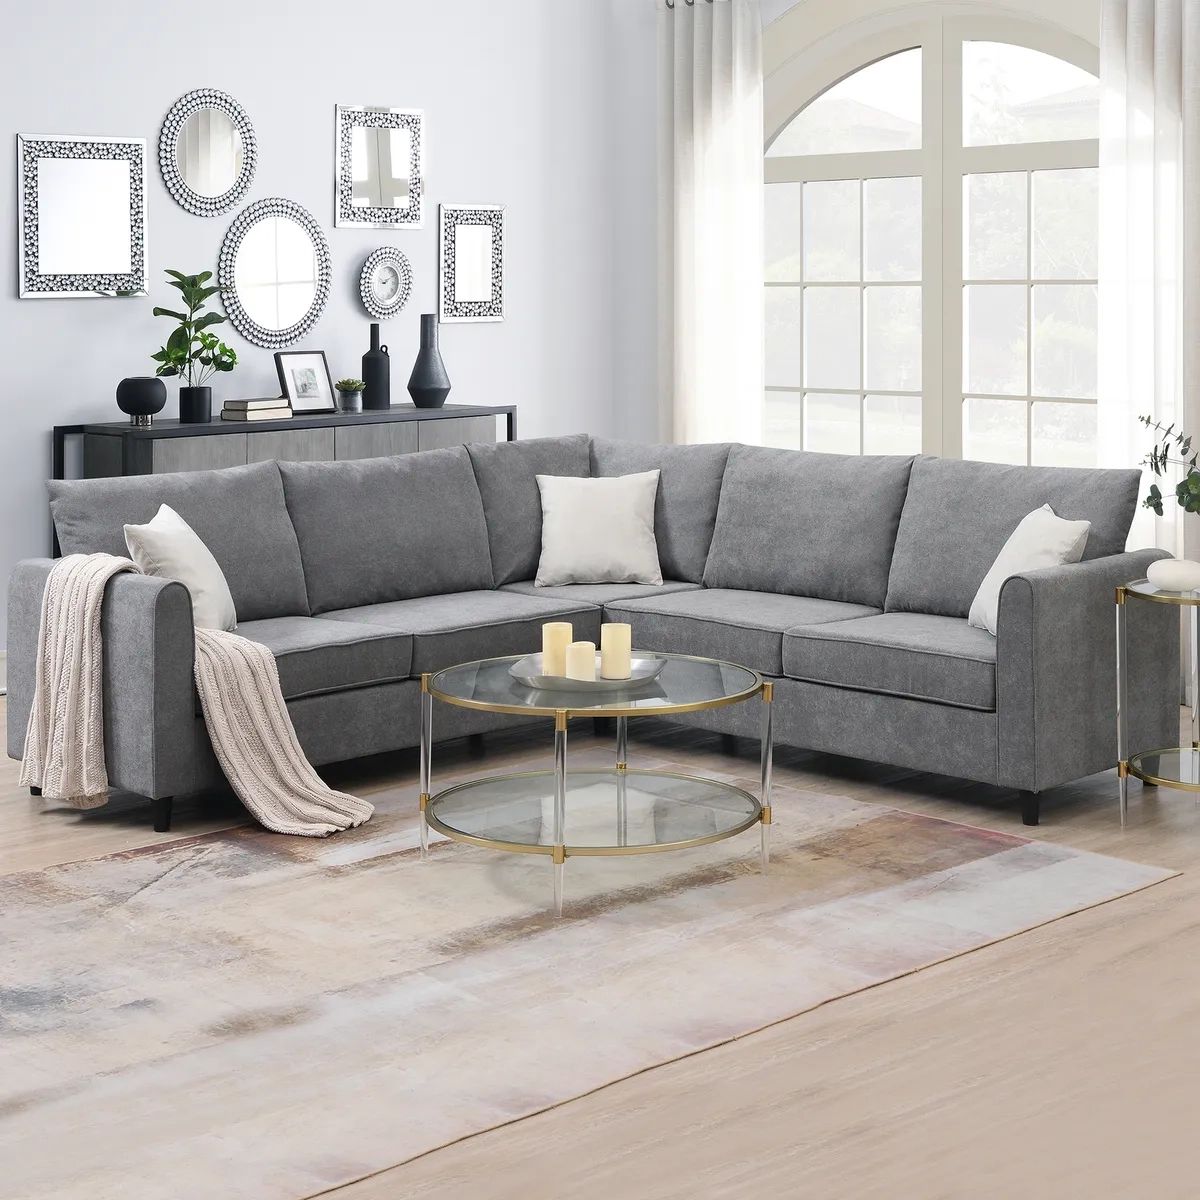 Habitrio Modern Sectional Sofa Set L Shaped Upholstered Couches Gray W/3  Pillows 195358179284 | Ebay With Regard To Modern L Shaped Sofa Sectionals (View 11 of 15)